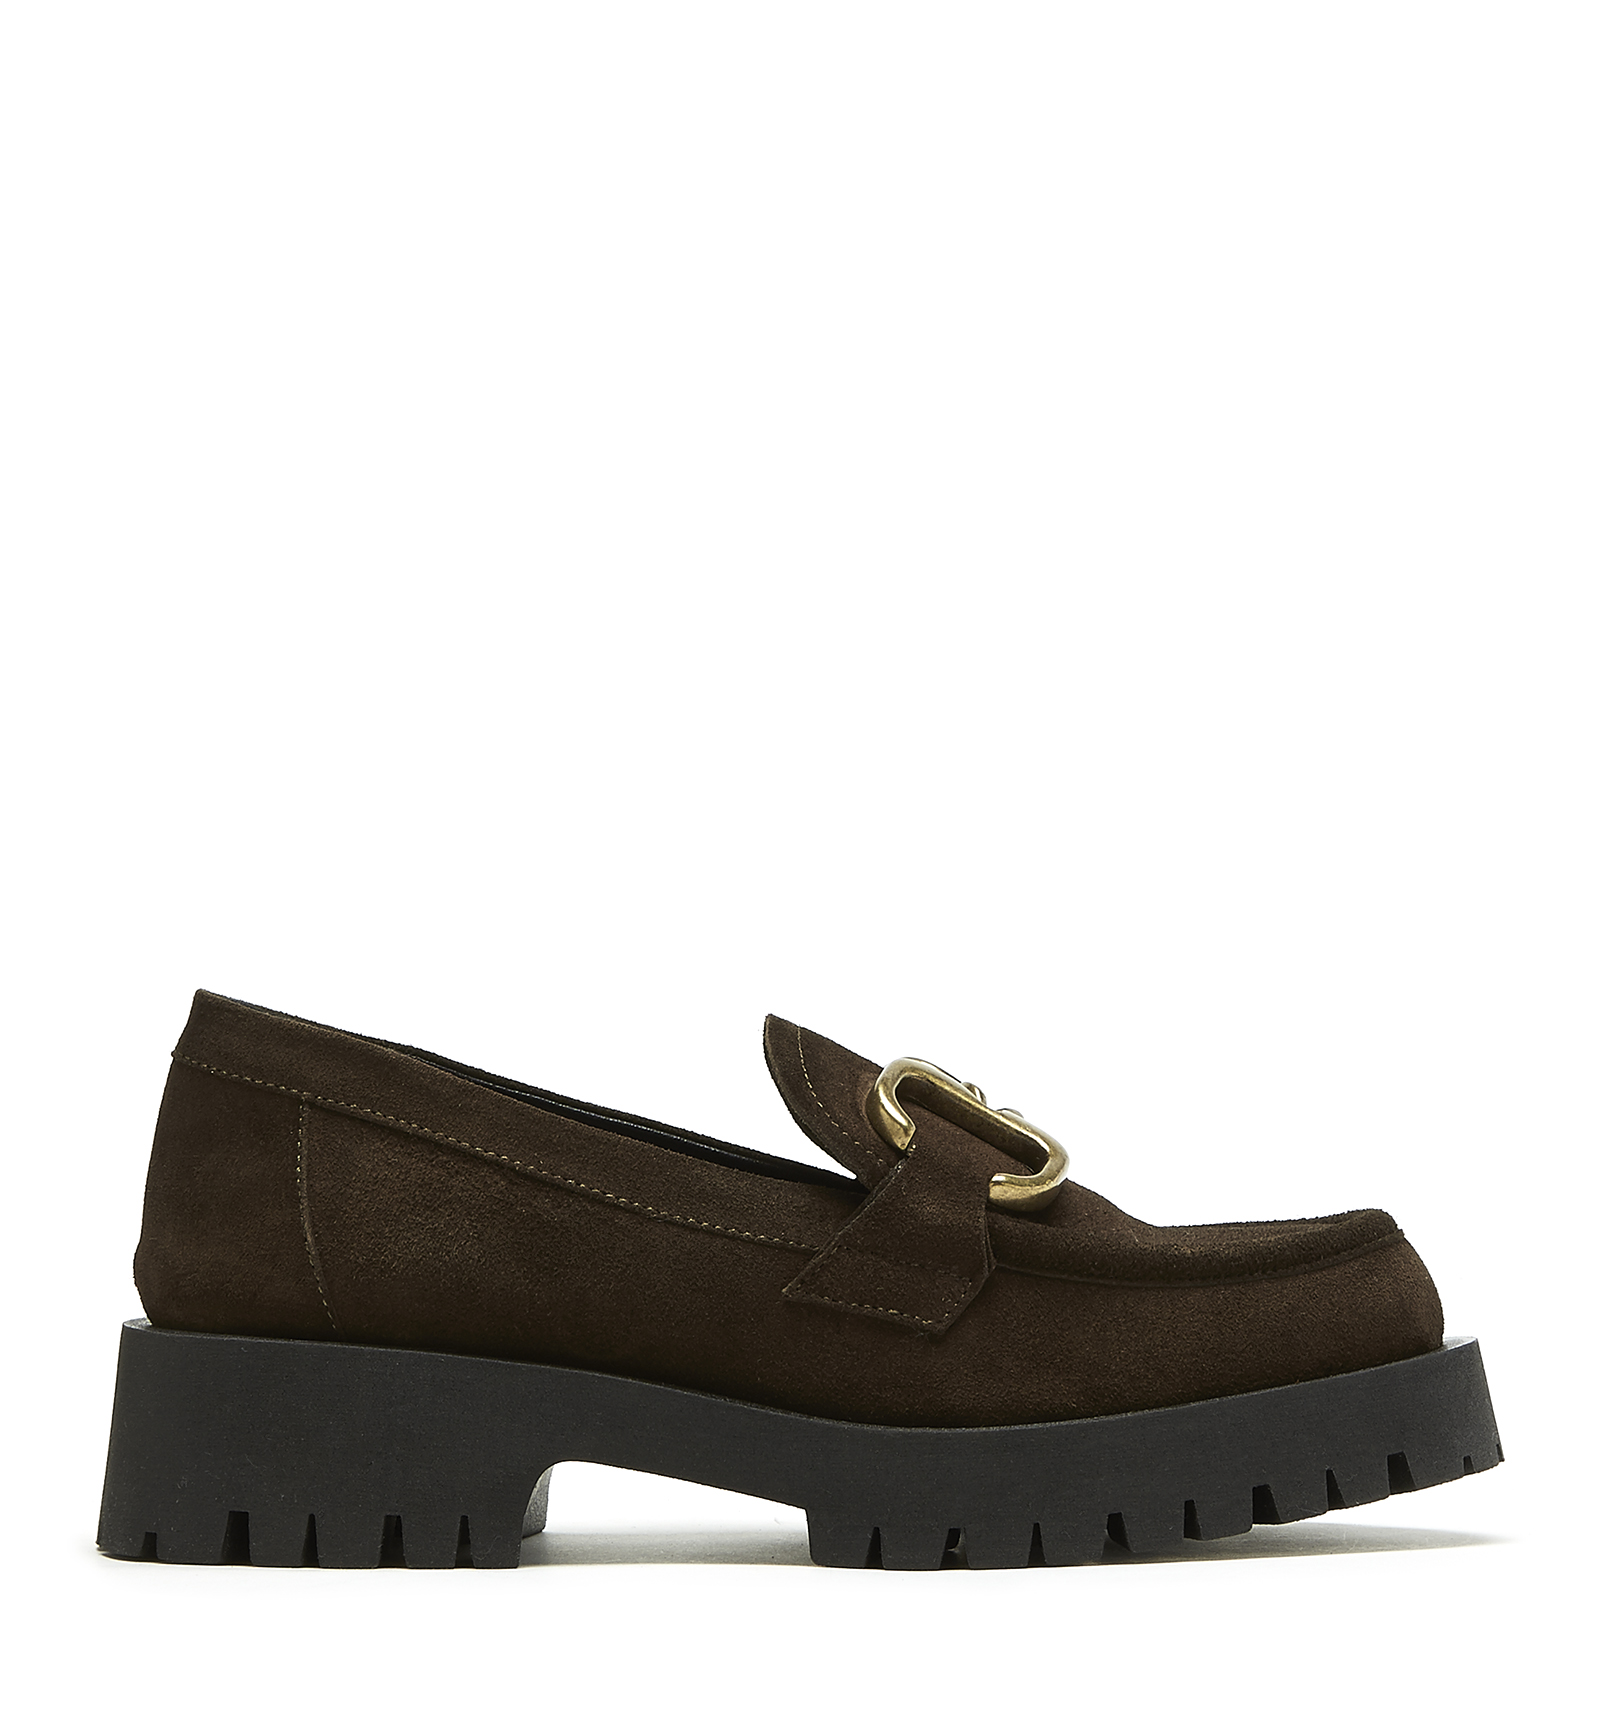 La Canadienne Bradchic Suede Loafer In Military